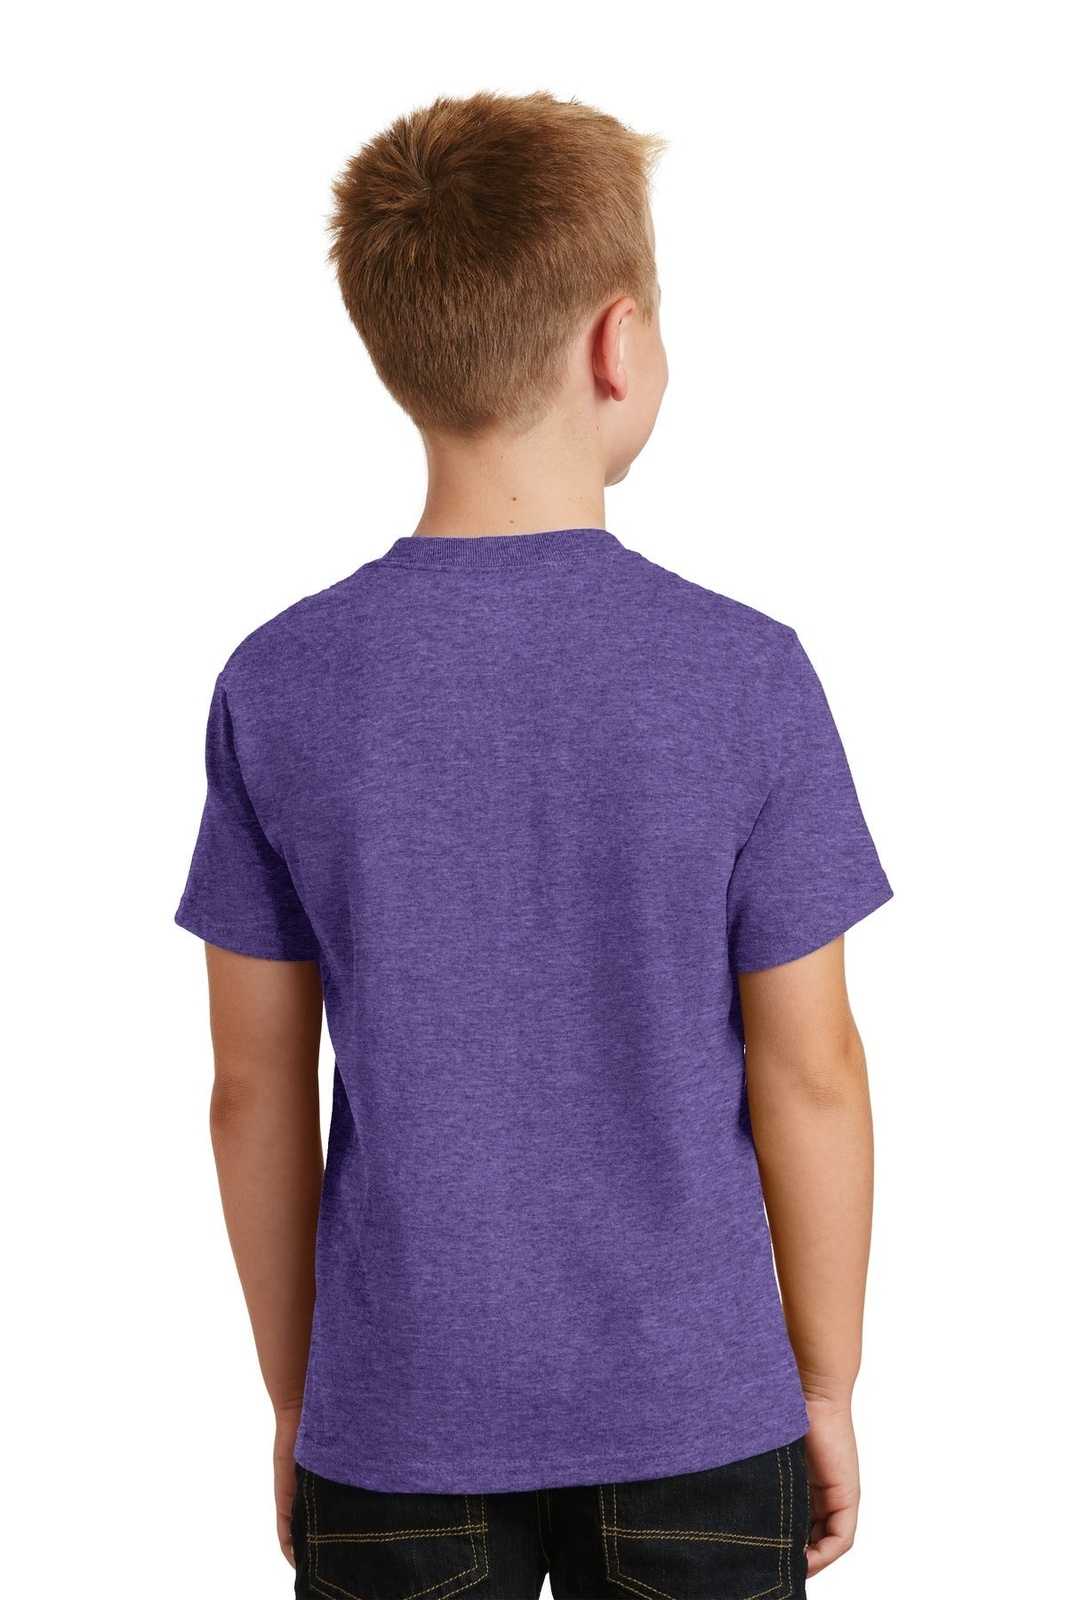 Port & Company PC54Y Youth Core Cotton Tee - Heather Purple - HIT a Double - 1